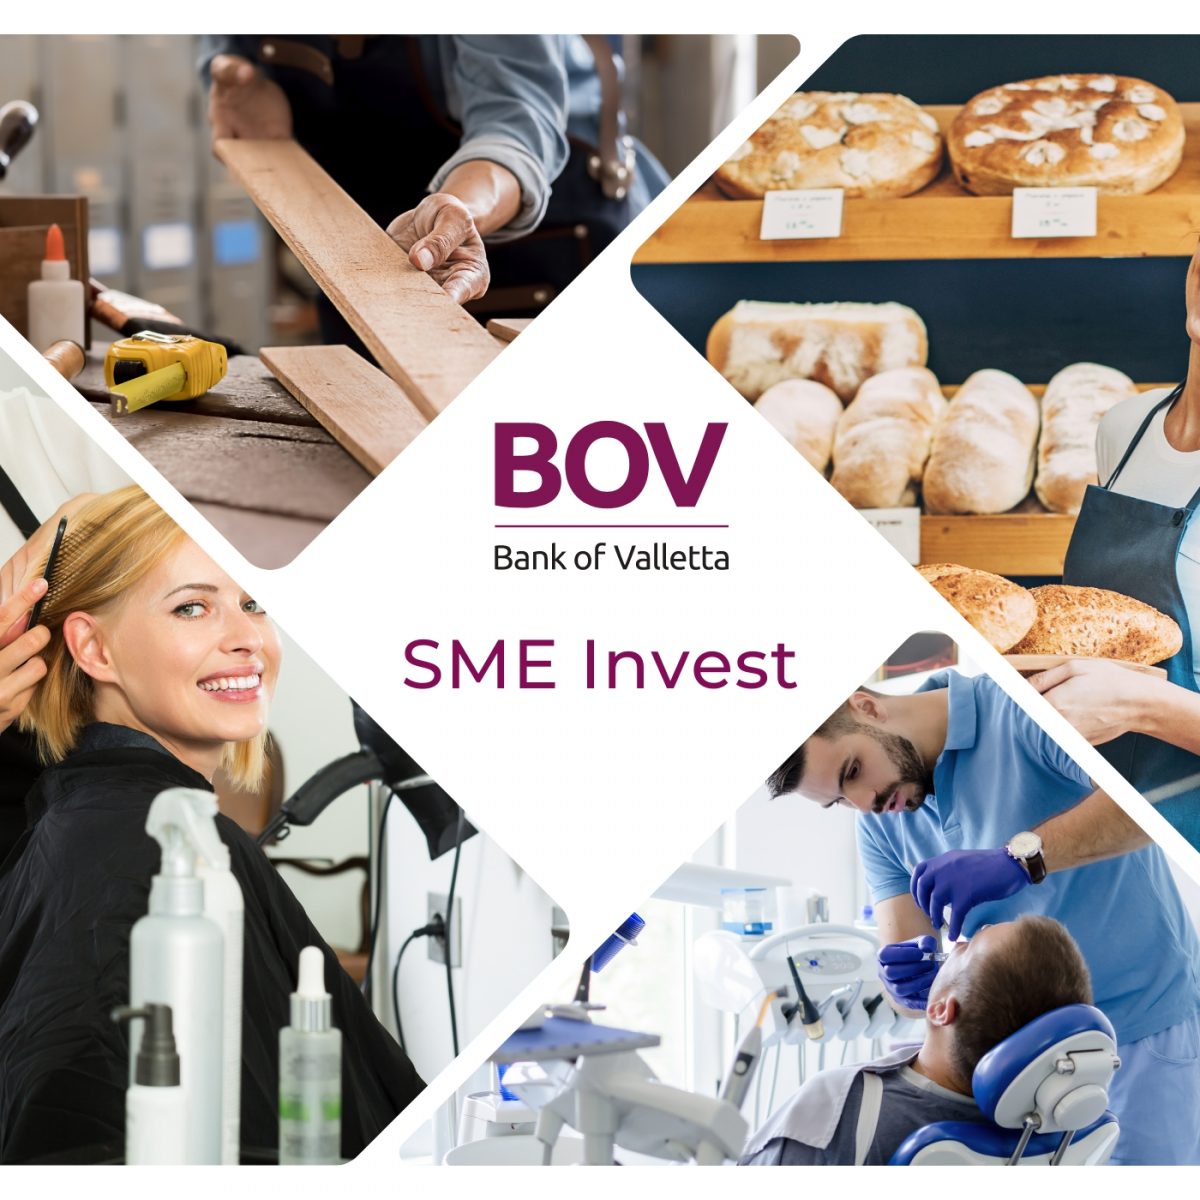 BANK OF VALLETTA ACQUIRES NEW FUNDING TO RELAUNCH THE BOV SME INVEST PACKAGE